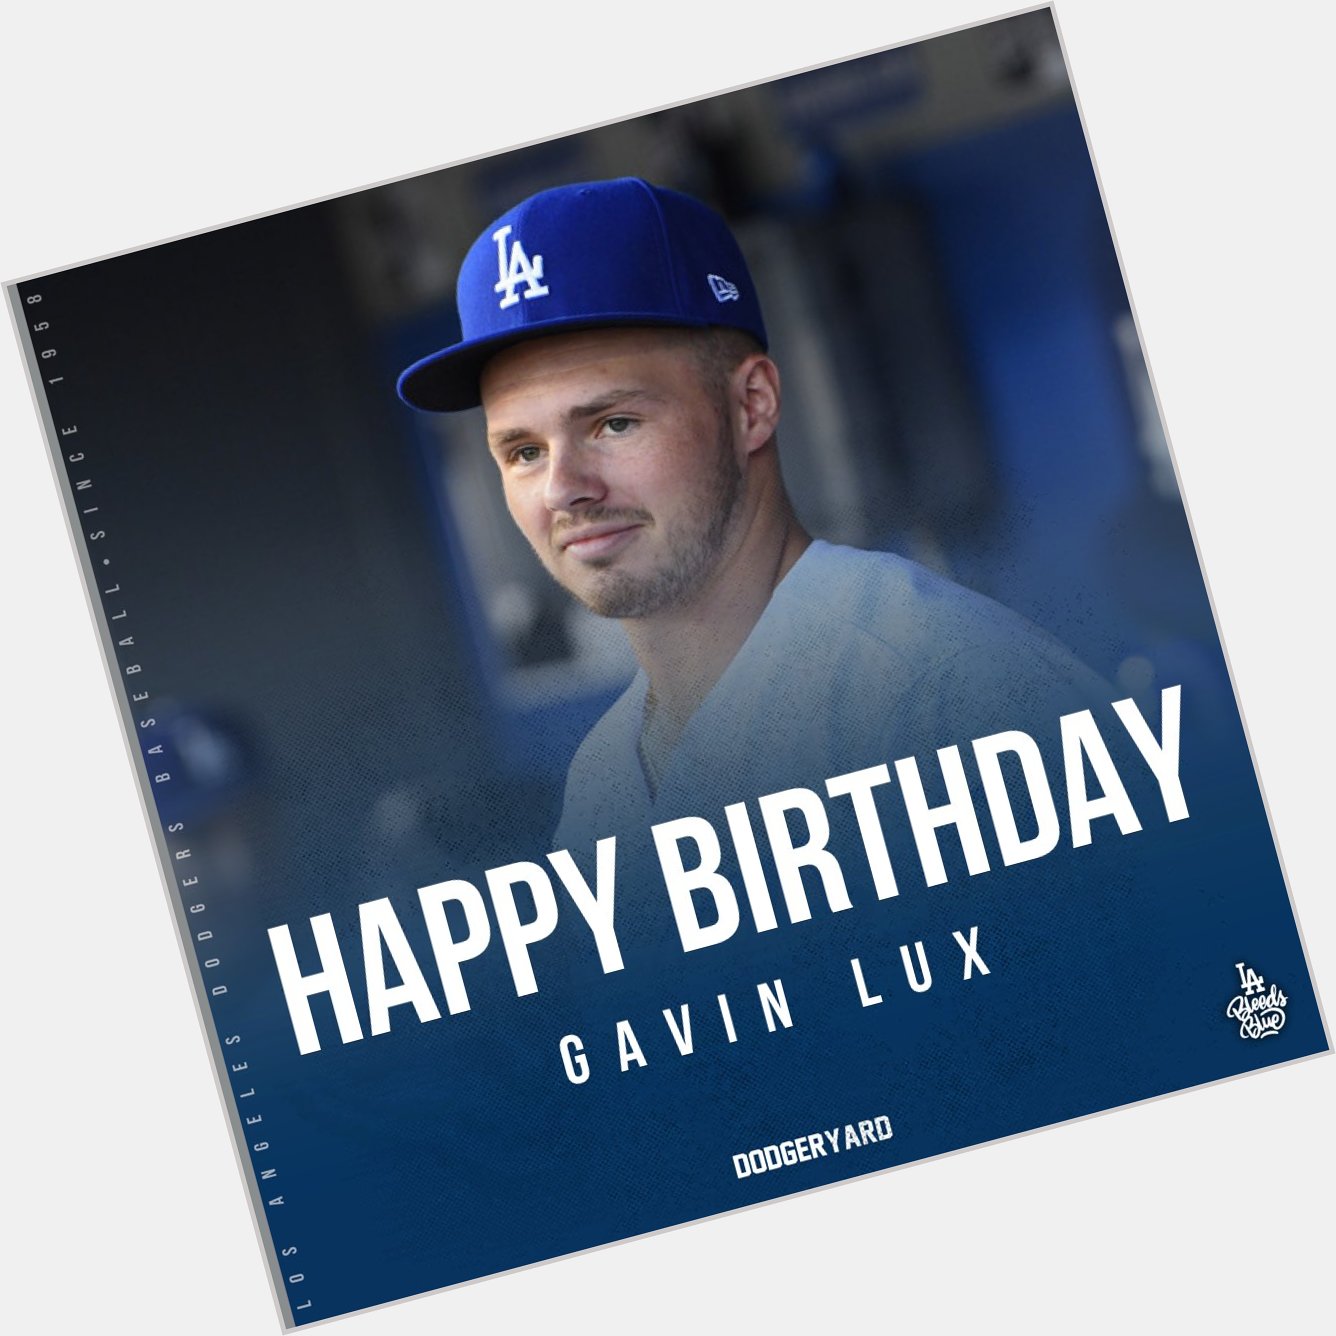 Happy birthday to Gavin Lux, Ross Stripling, and Justin Turner!  